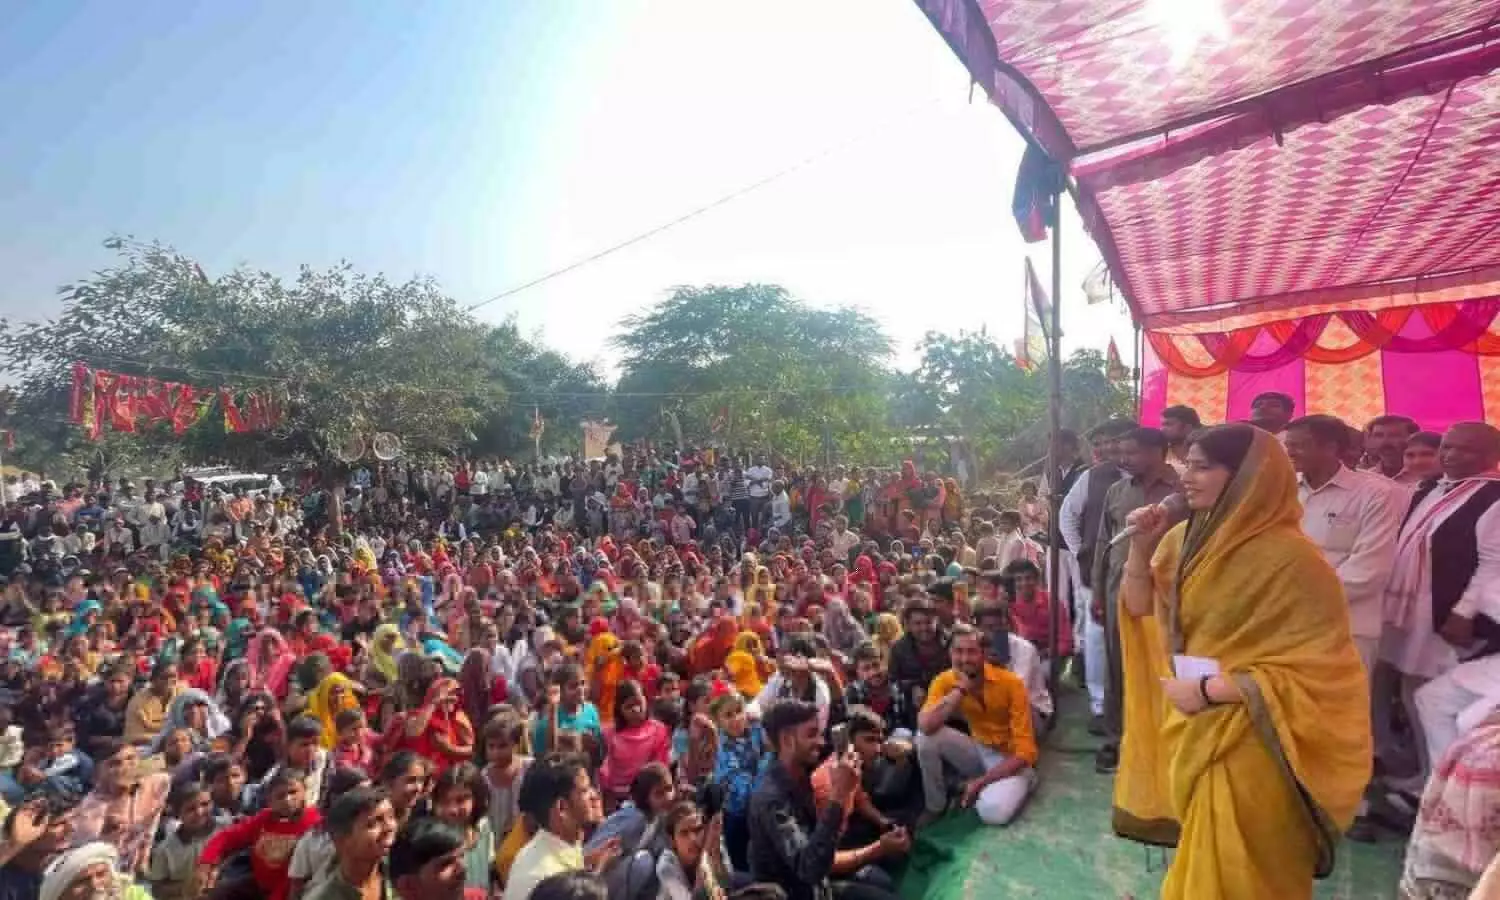 Mainpuri By Election SP candidate Dimple Yadav asked for votes by holding street meetings